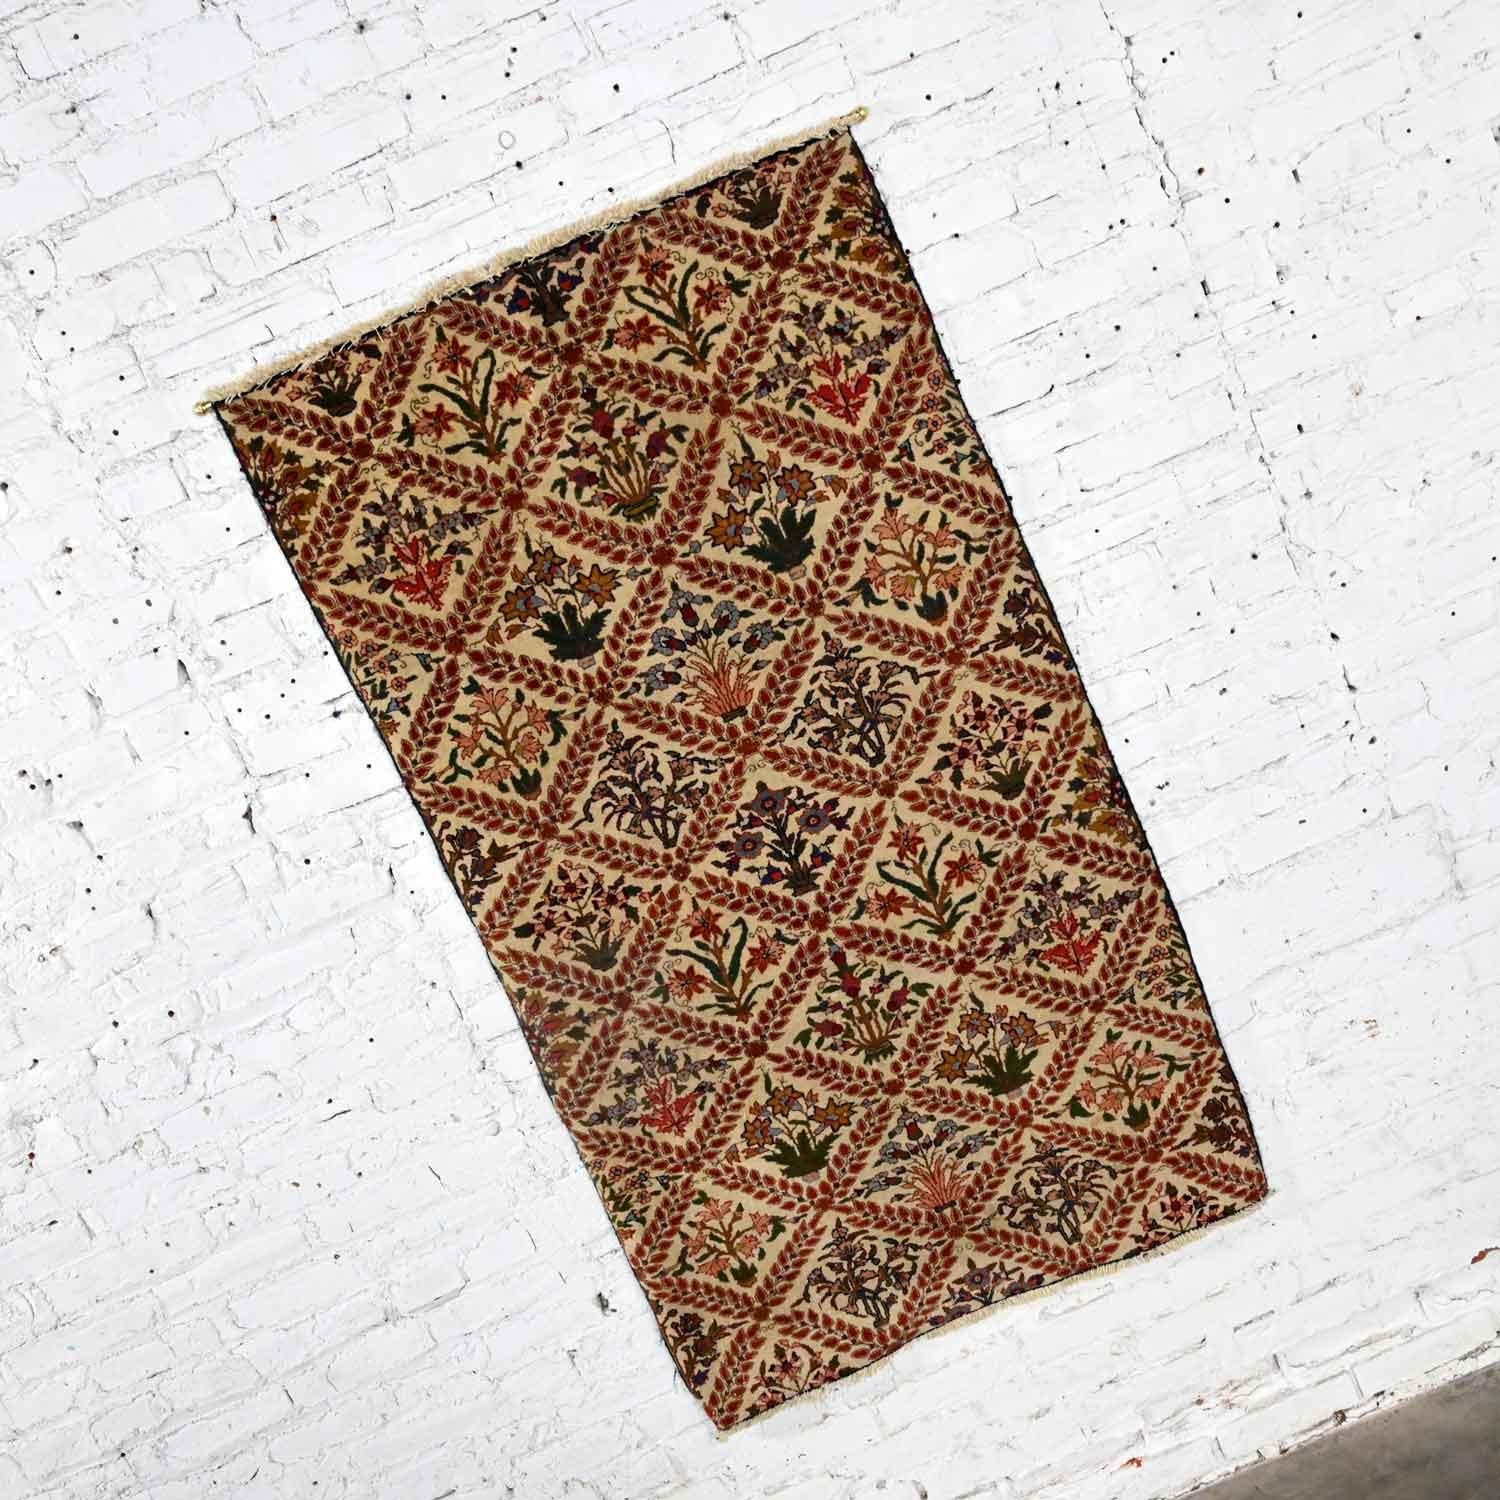 Tribal Antique Persian Oriental Hand Woven Wool & Cotton Leaf & Floral Rug Wall Hanging For Sale